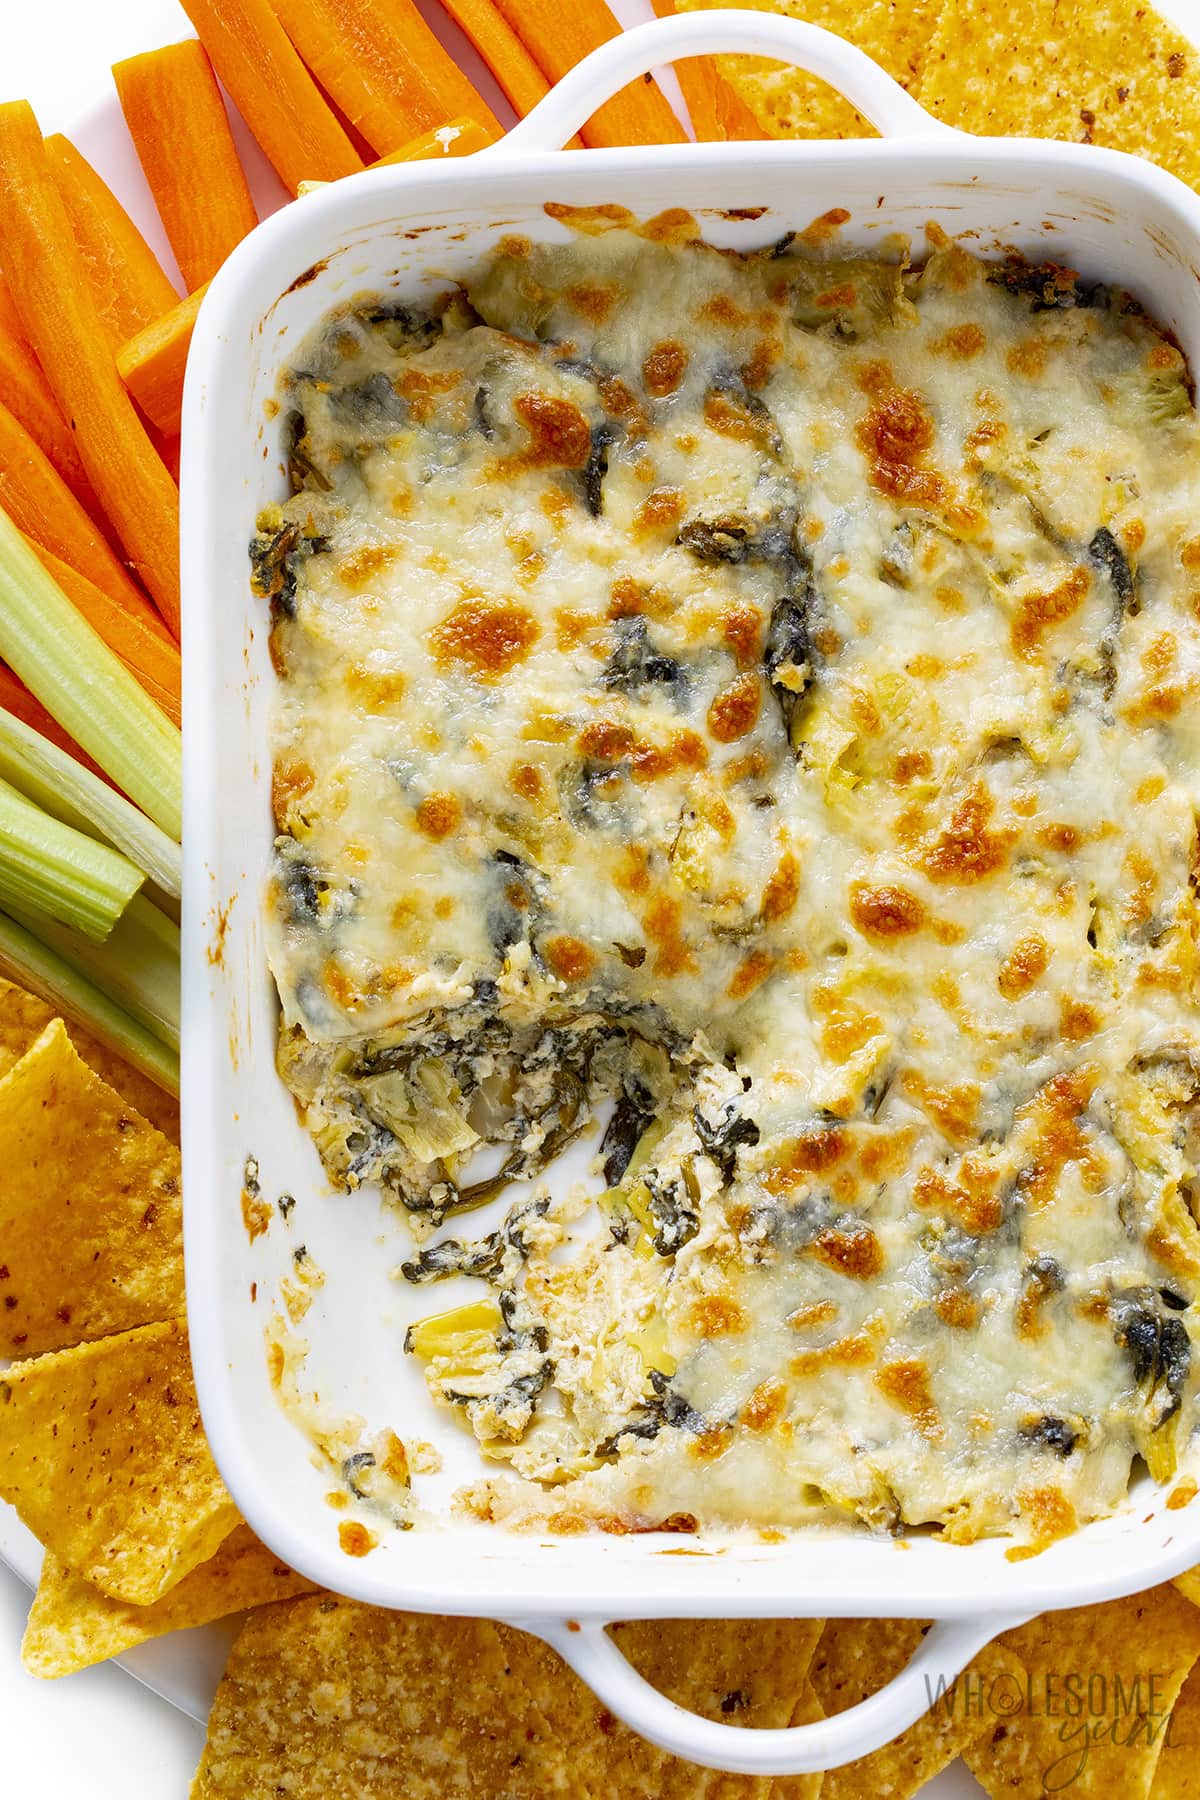 Easy Spinach Artichoke Dip Recipe - Story Telling Co